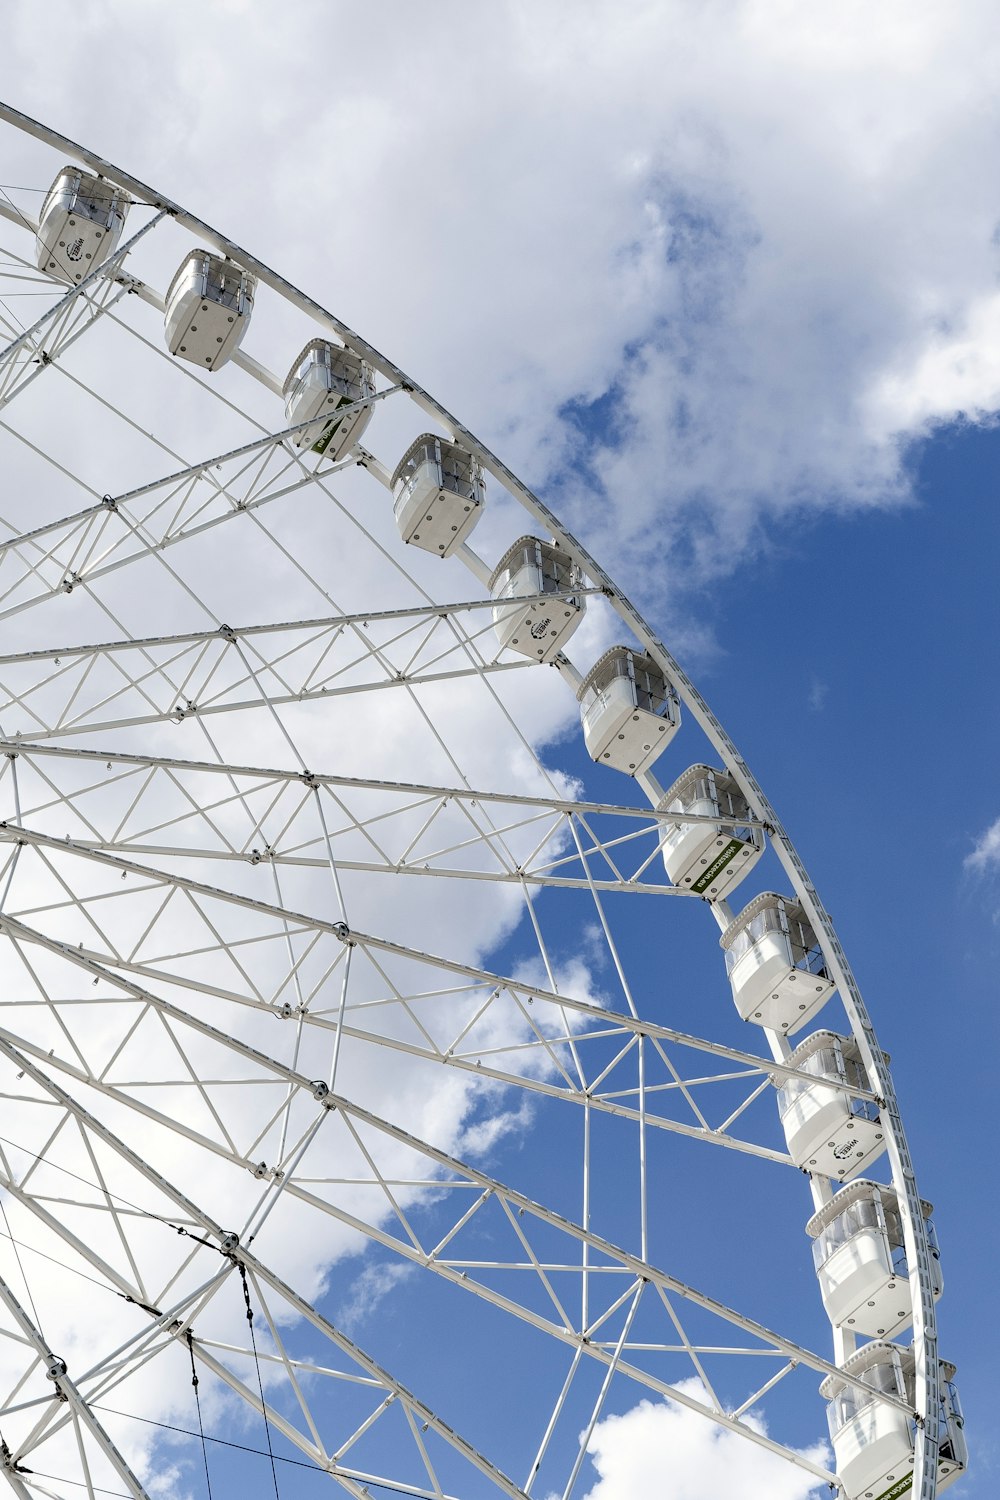 a large white ferris wheel on a cloudy day